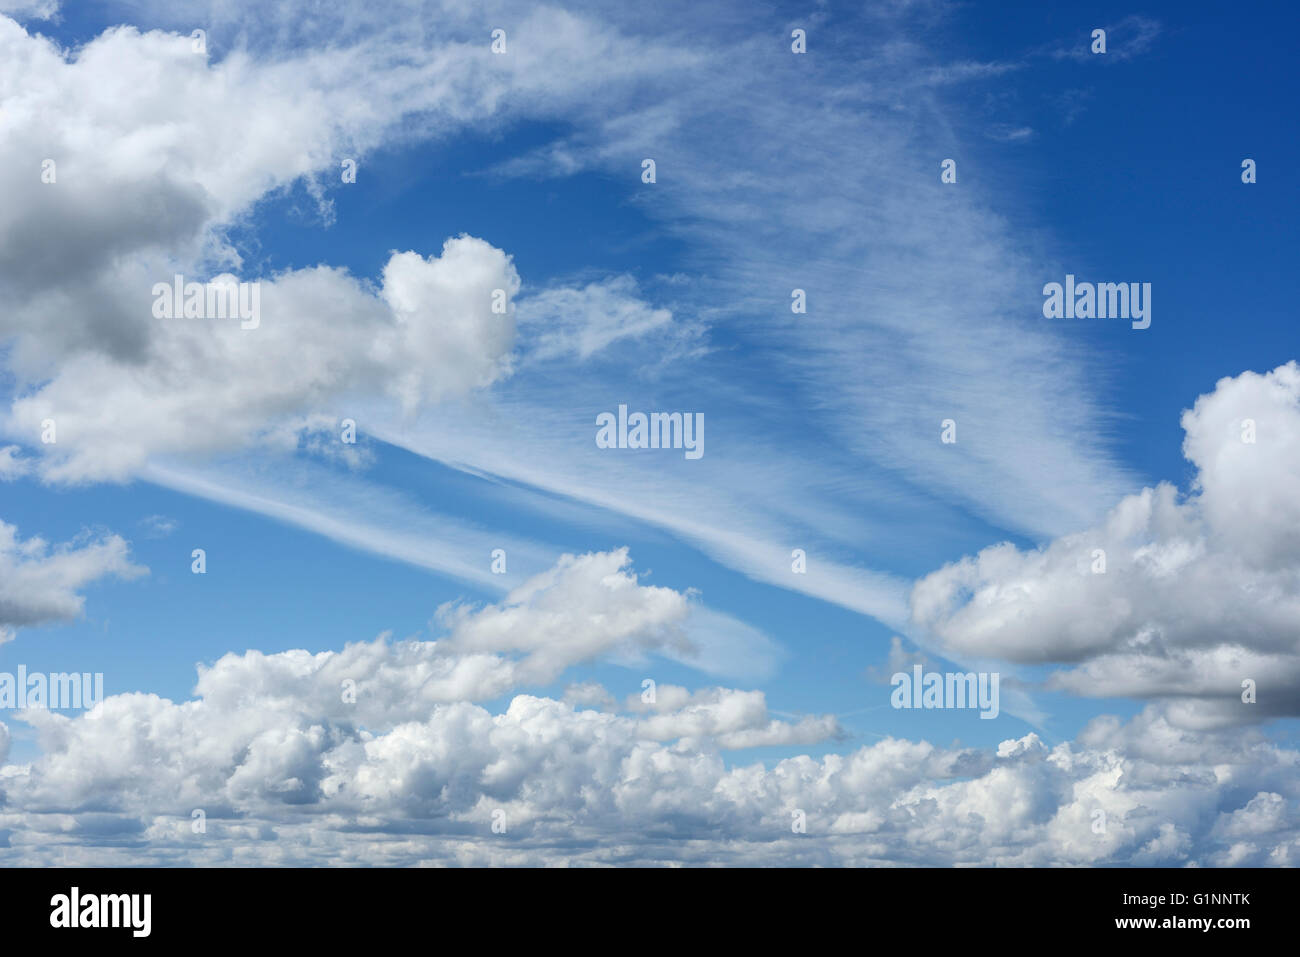 Summer cloud formations with blue sky and vapour trails Stock Photo